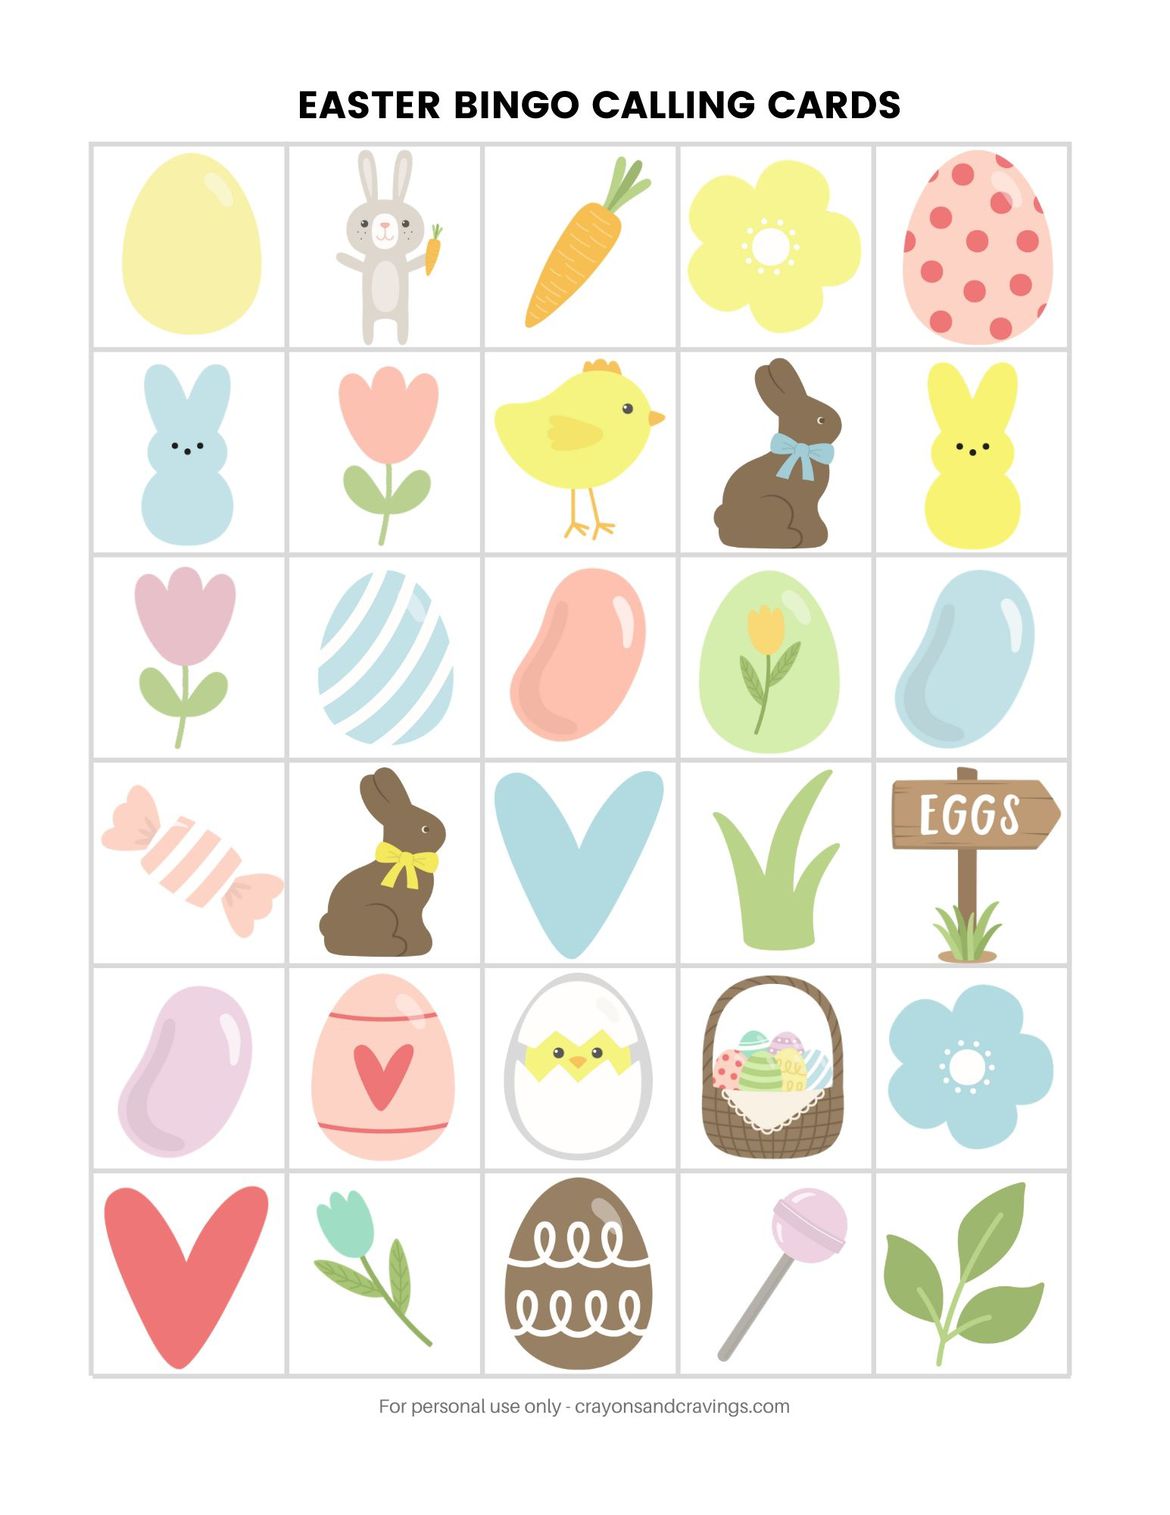 Calling Cards for Easter BINGO